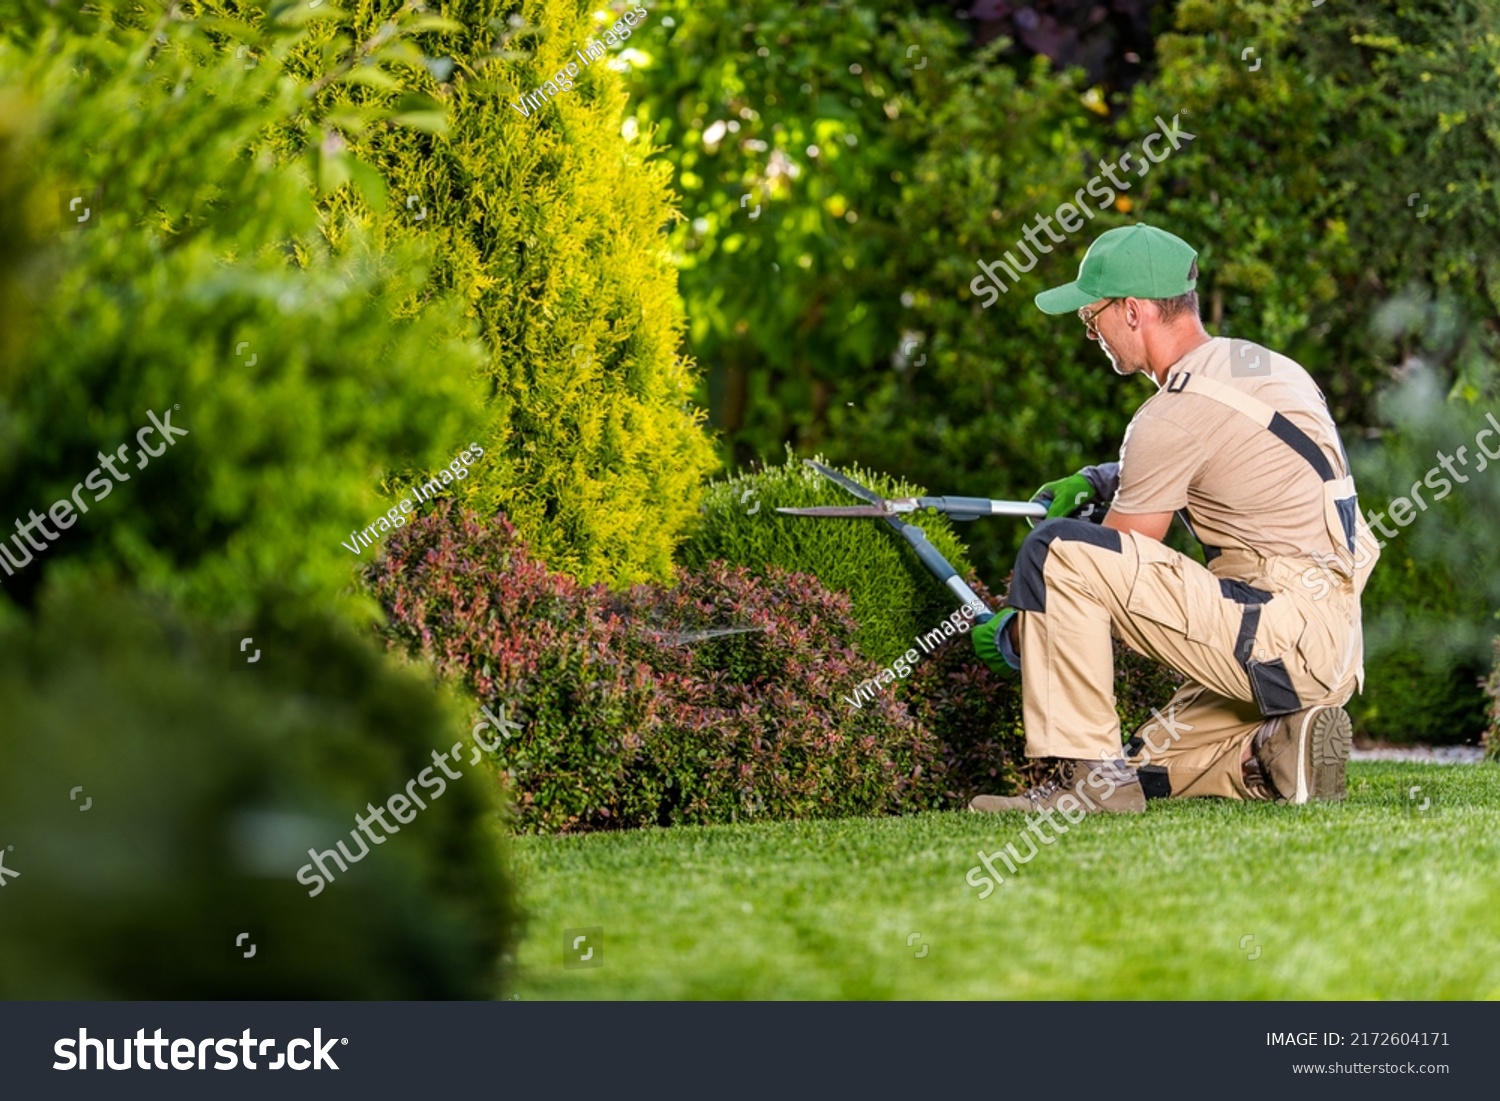 Garden Pruning Works to Maintain the Appearance of Shrubs, Bushes, Trees and Other Plants. Professional Landscaper Cutting the Overgrown Sprigs and Leaves with Garden Scissors. #2172604171